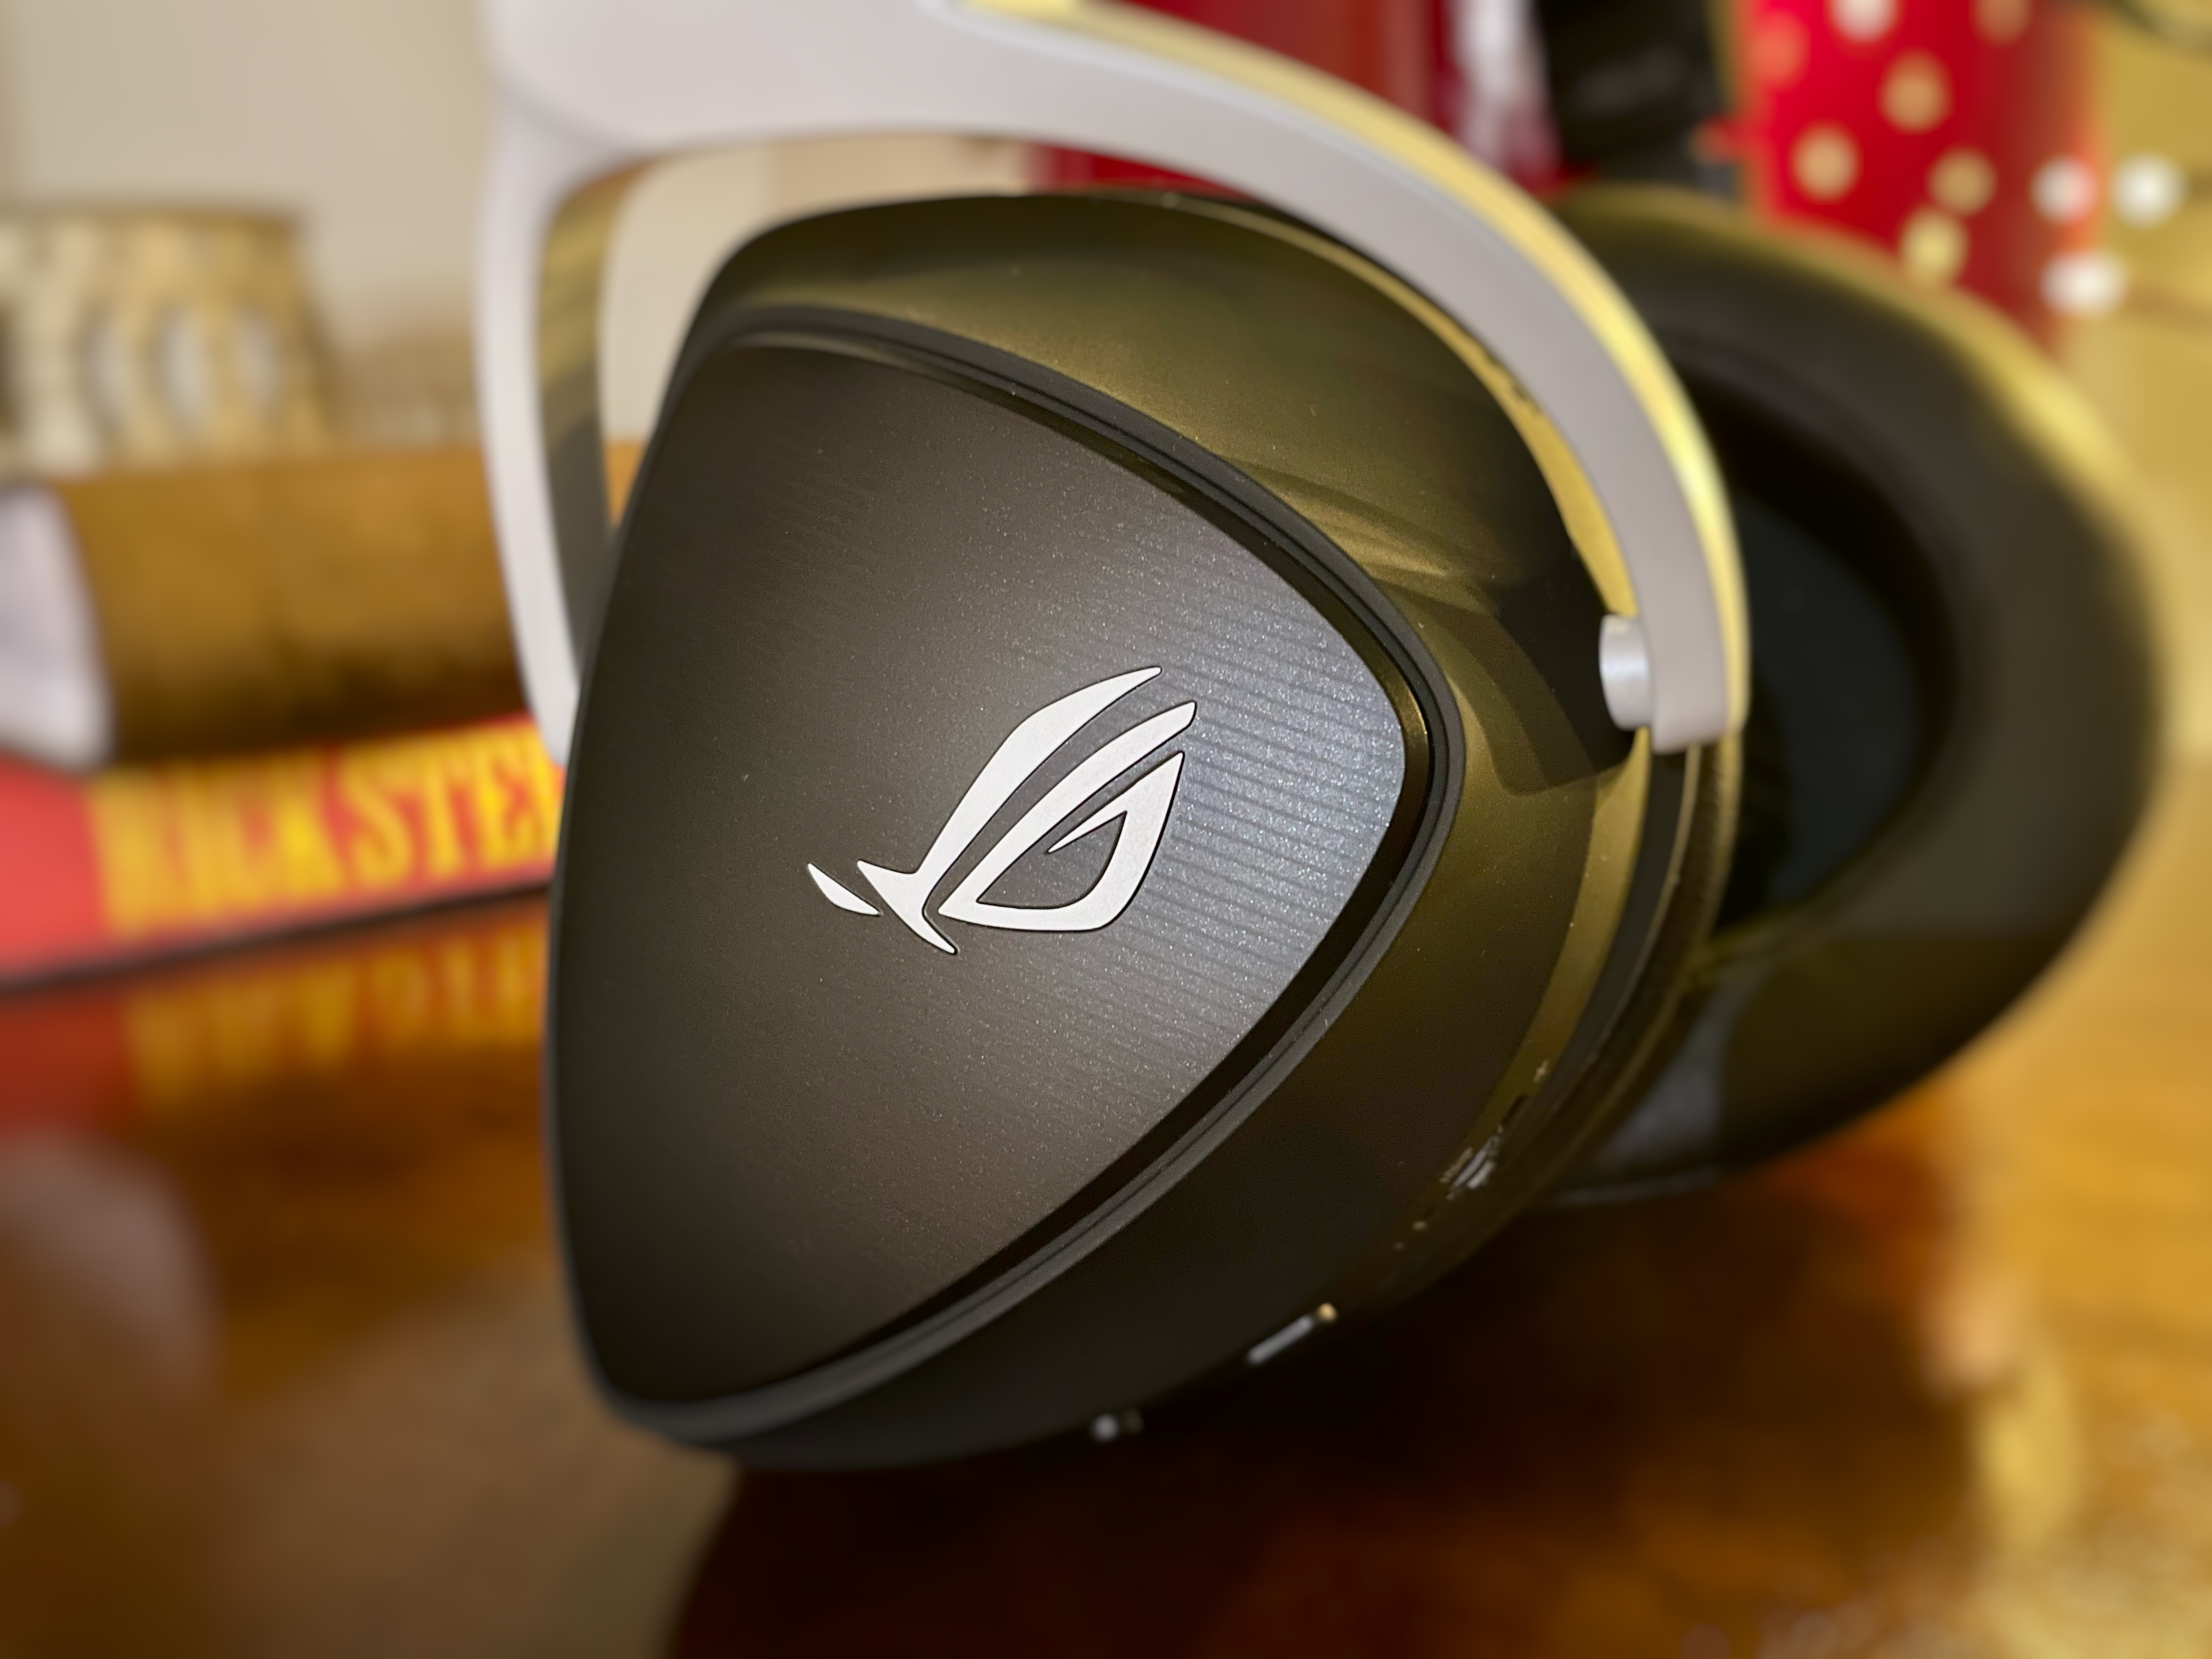 The ROG Delta S Wireless gaming headset from the side.